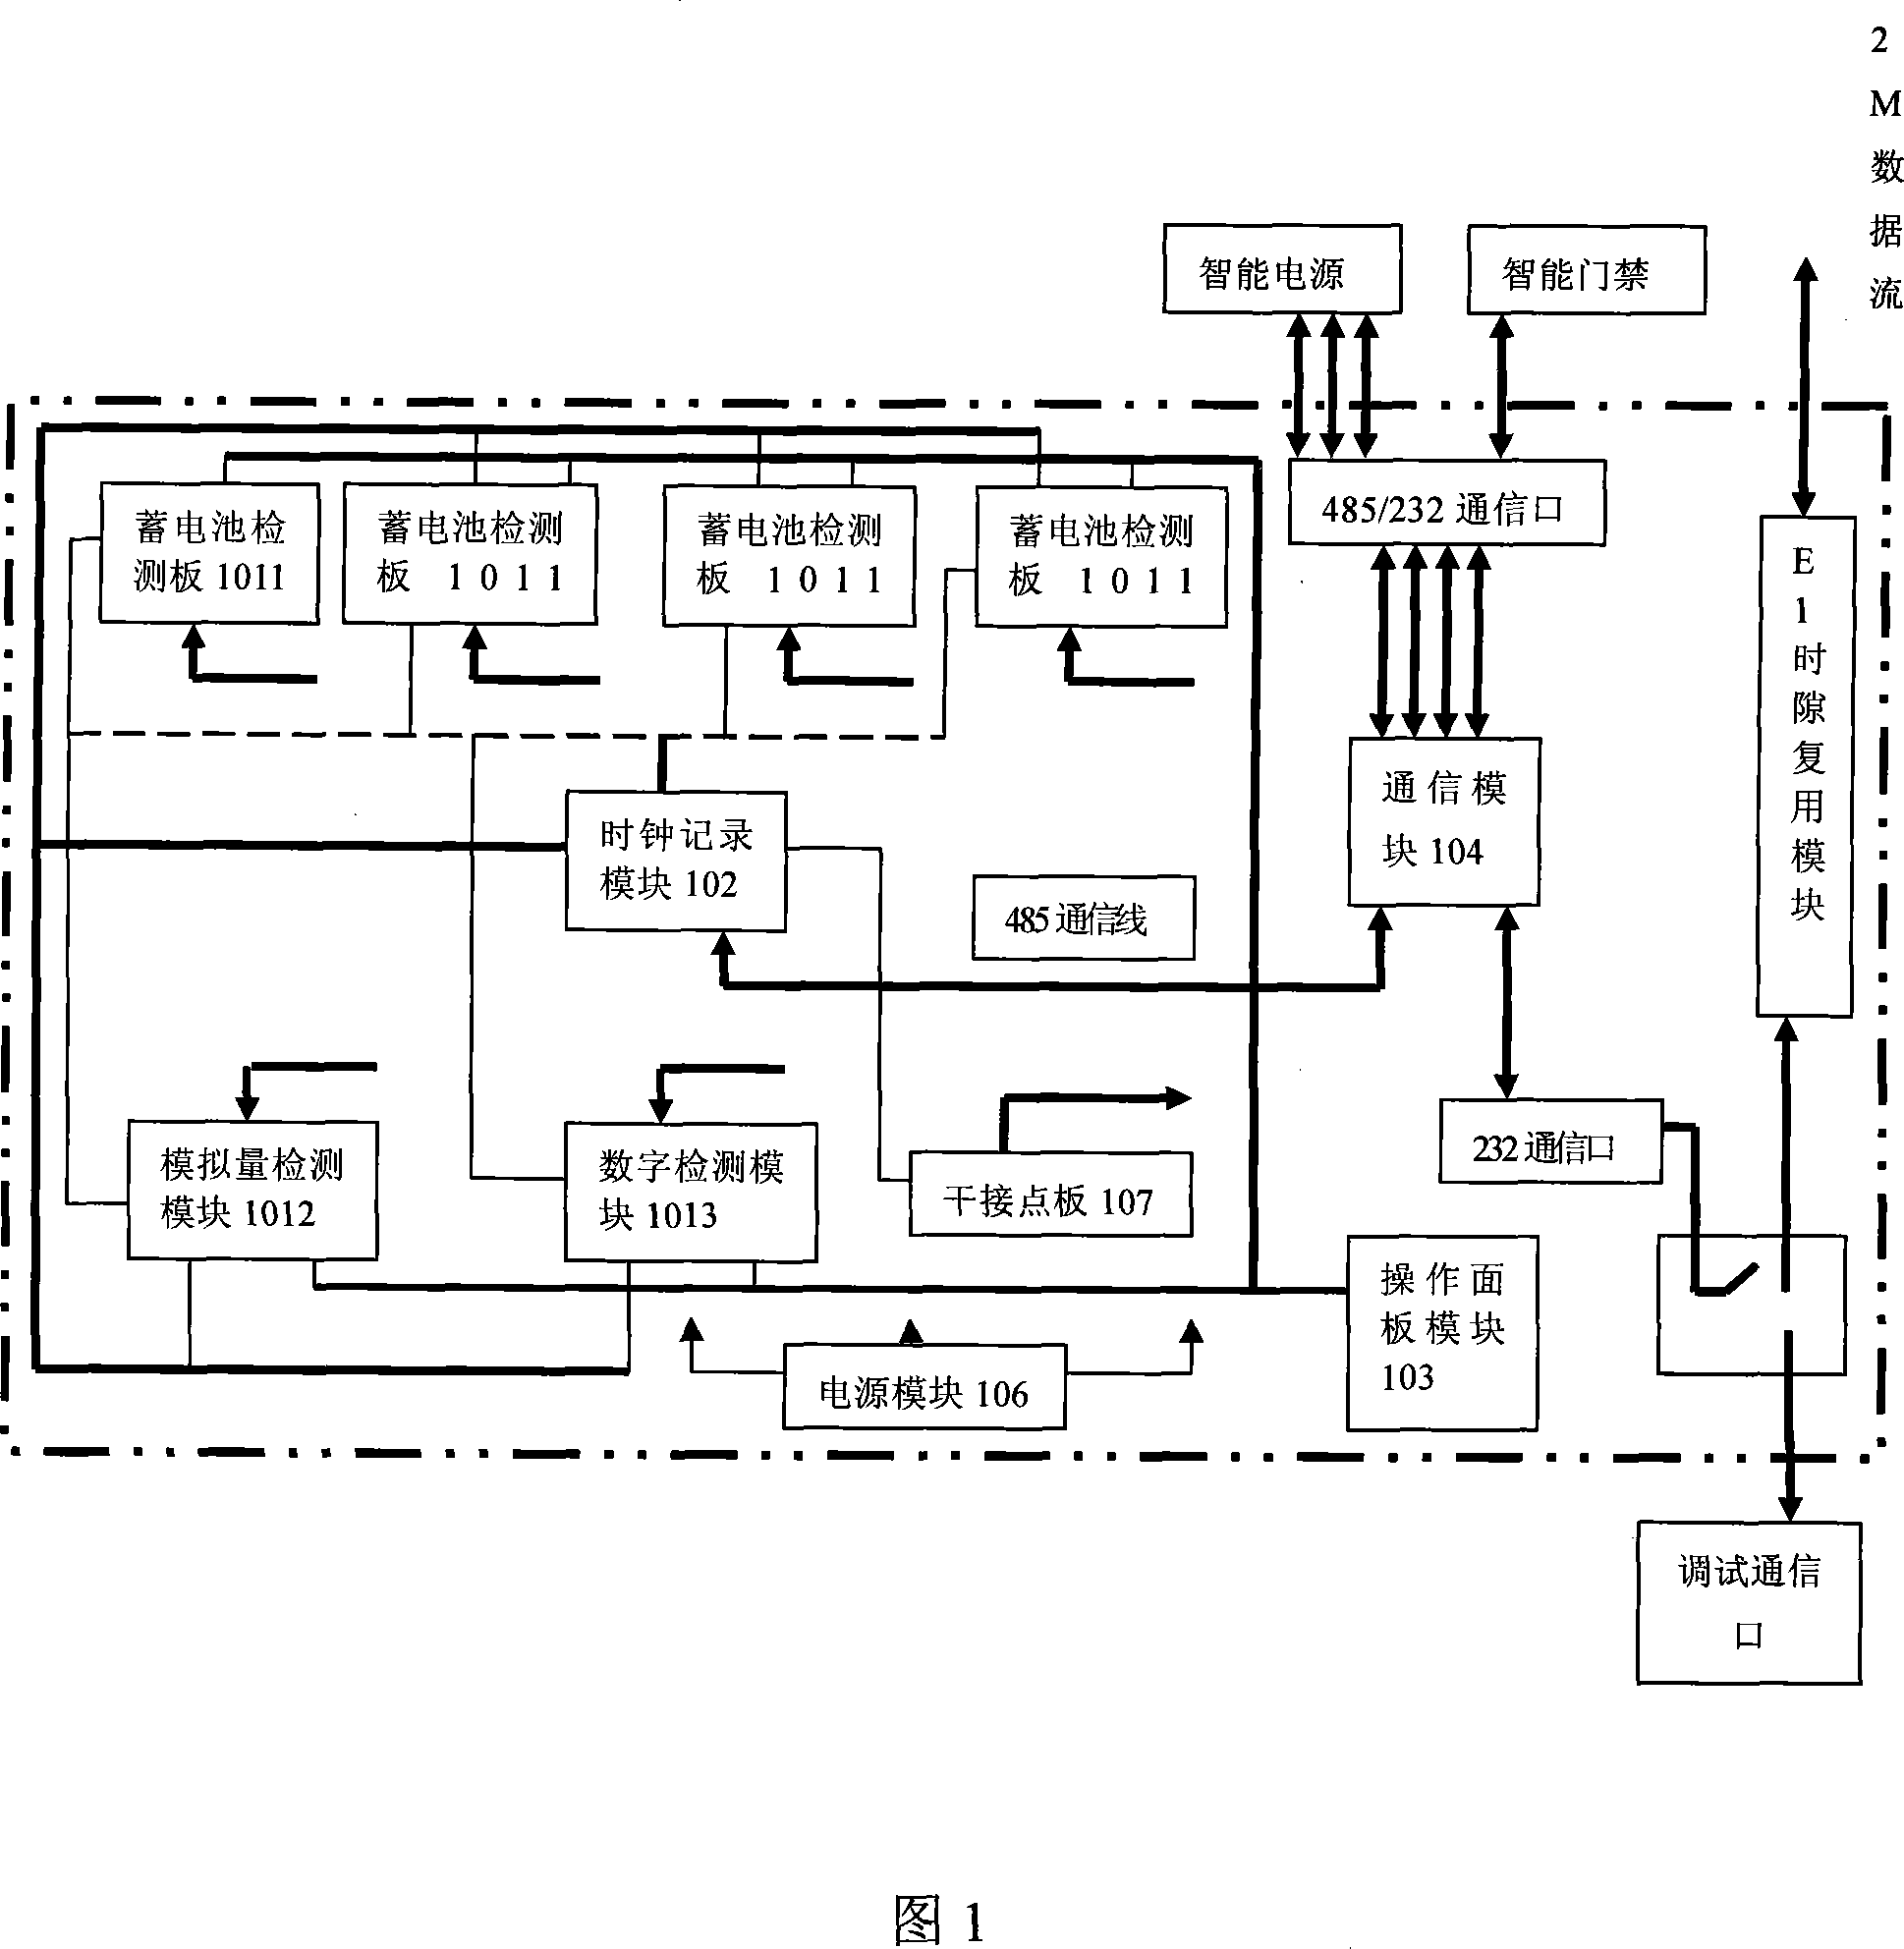 Monitoring device for dynamic environment of base station